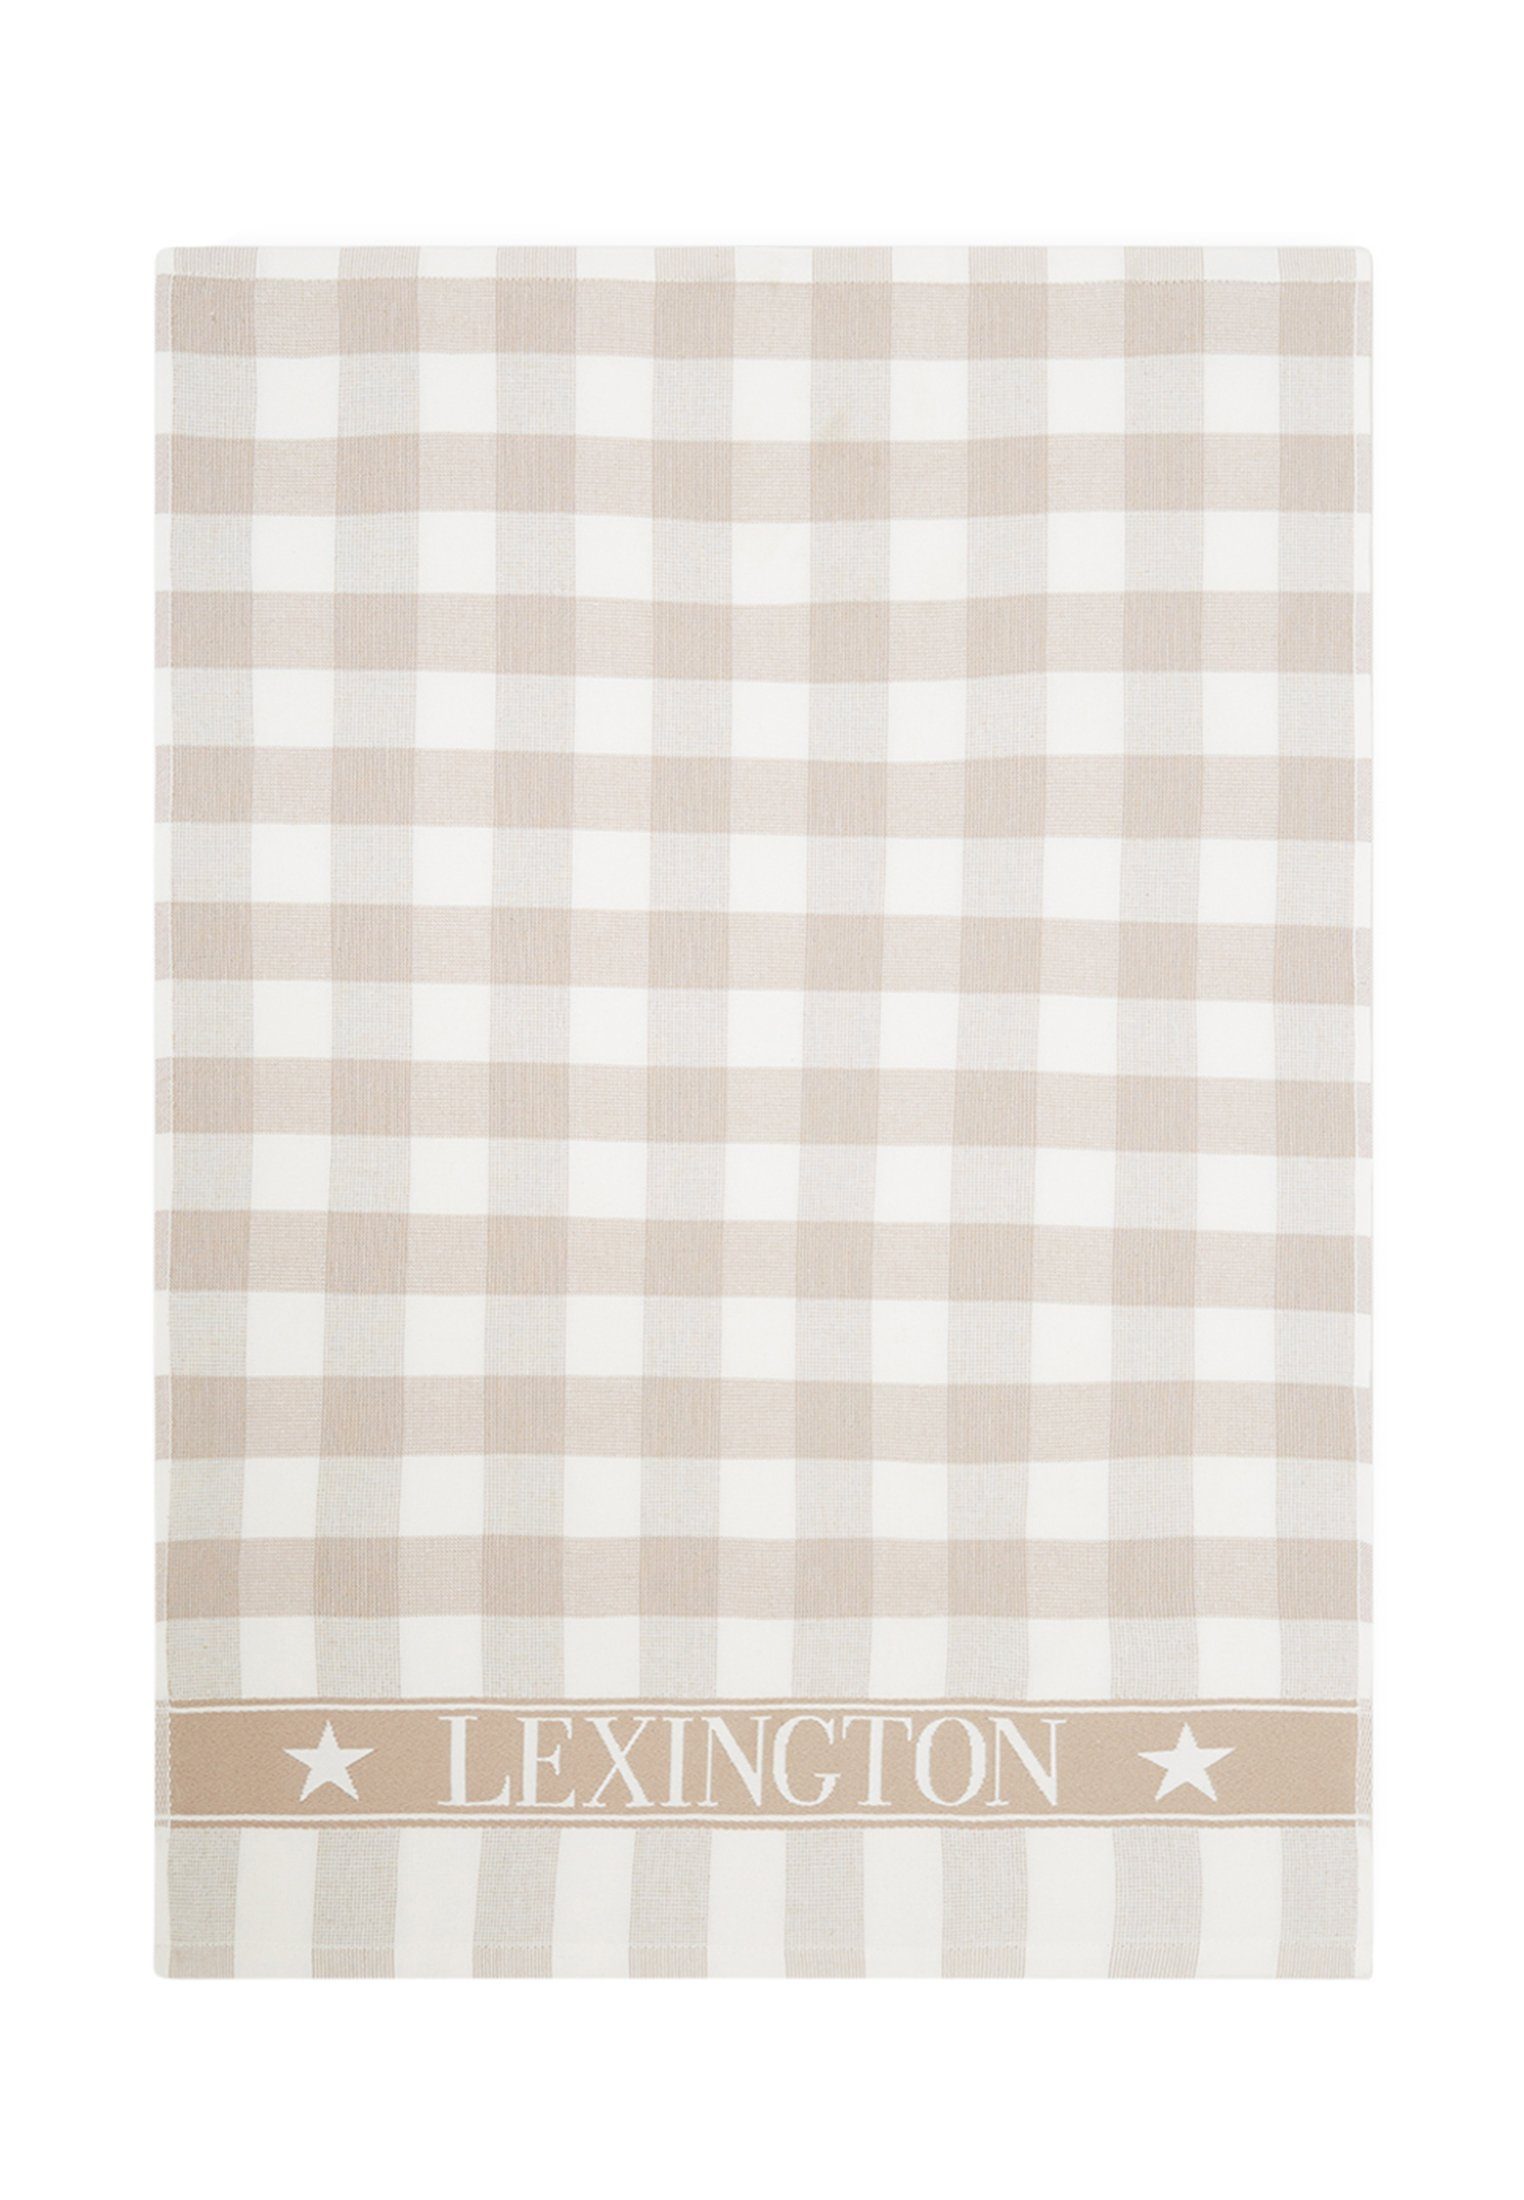 Icons Checked Lexington beige/white Terry Handtuch Cotton